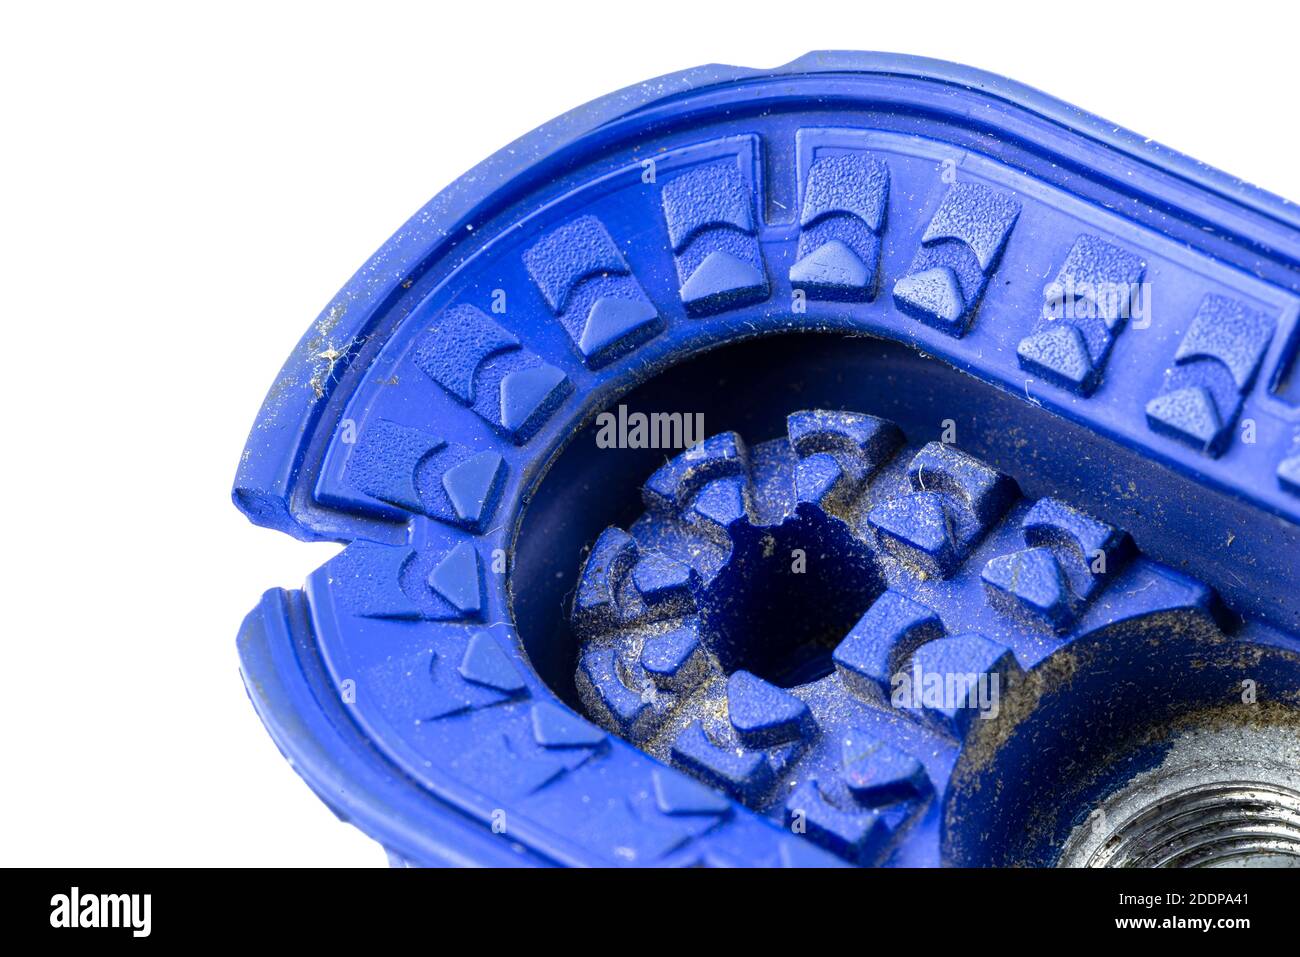 Macro shot of a old, blue bellows suction cup used in the robotic industry, isolated on a white background. Stock Photo